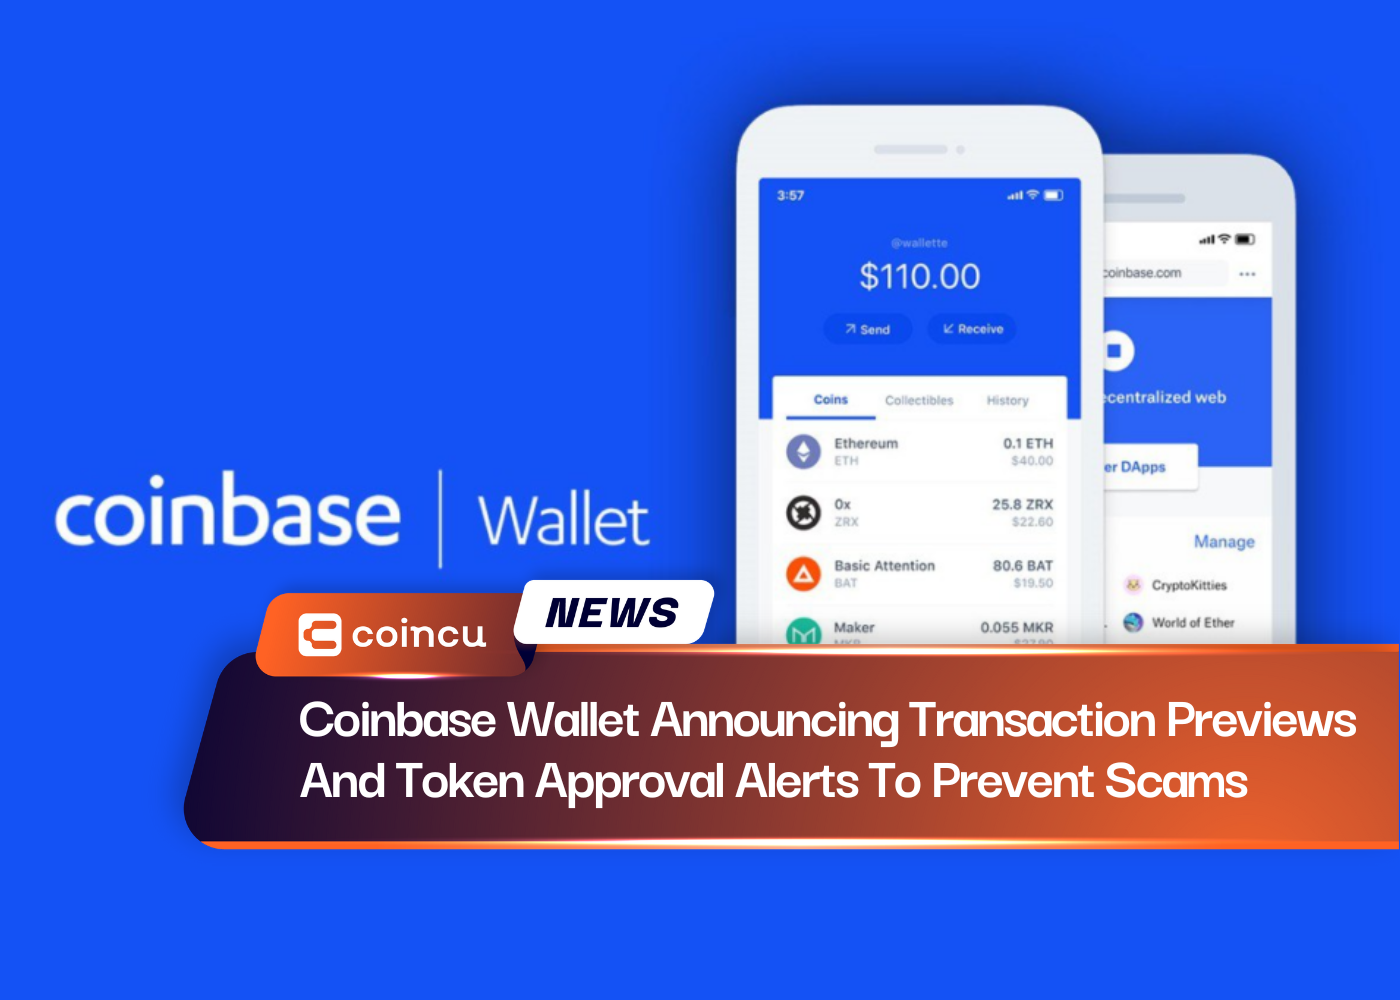 Coinbase Wallet Announcing Transaction Previews And Token Approval Alerts To Prevent Scams